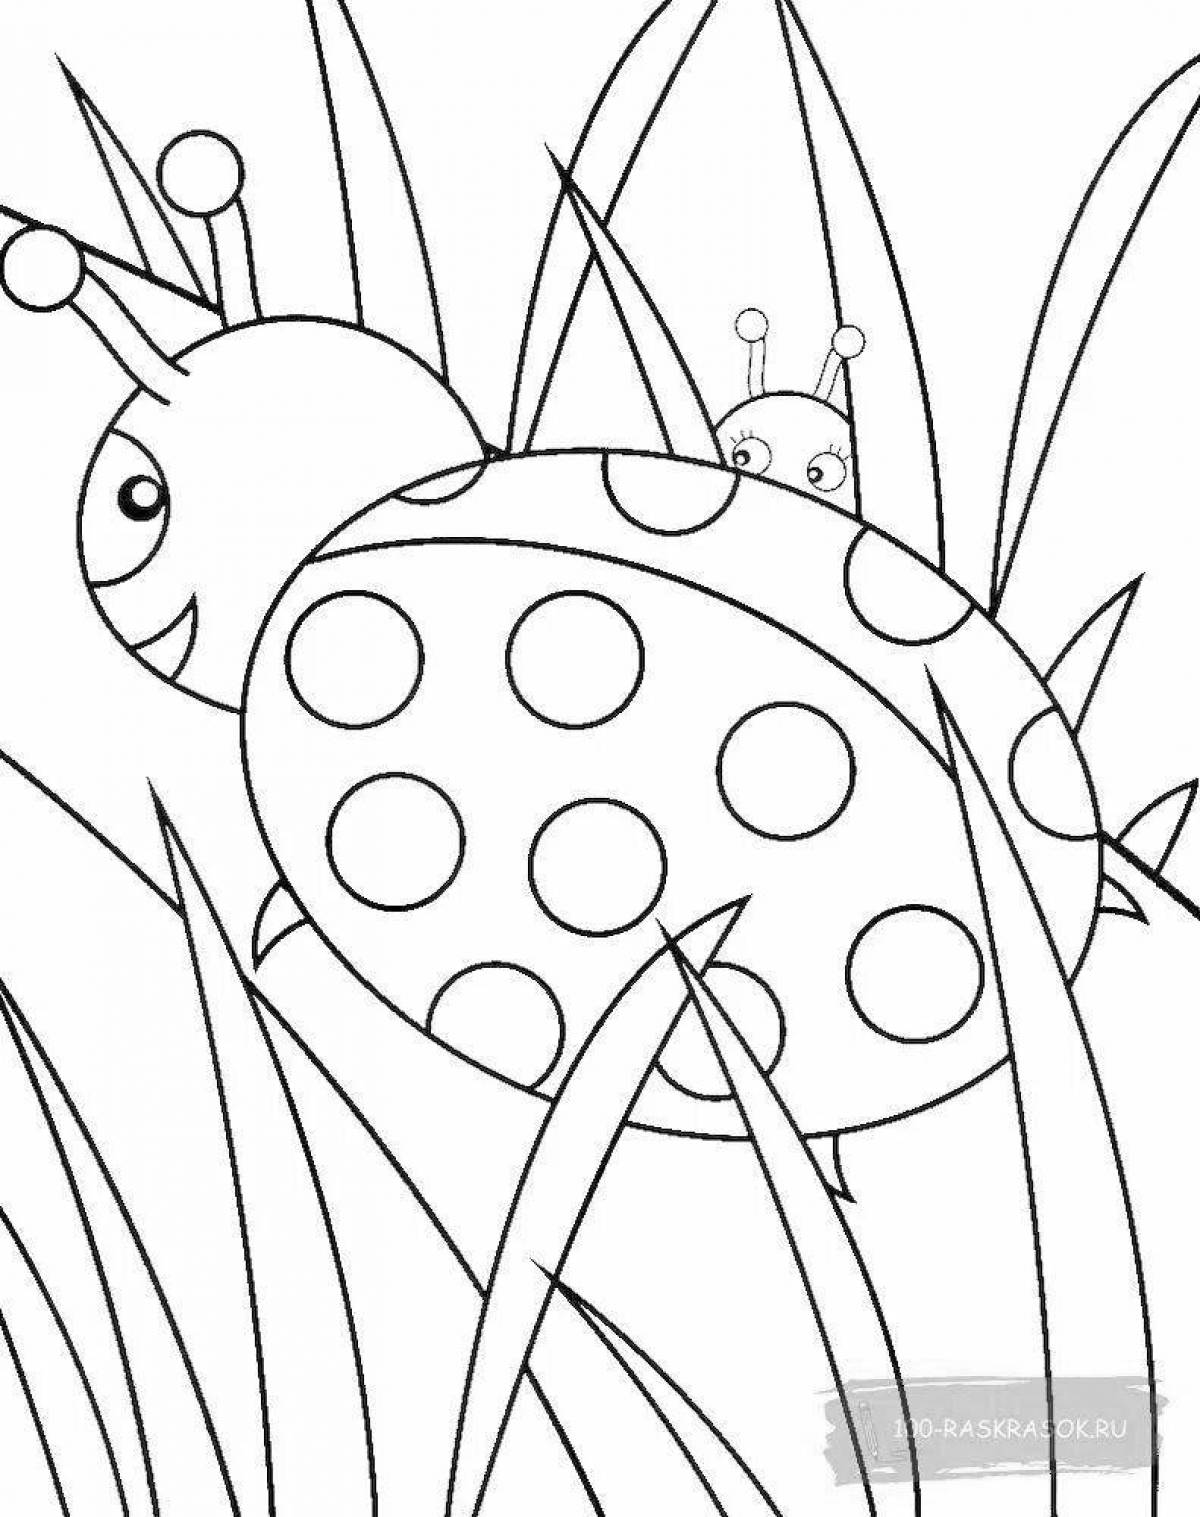 Shiny ladybug coloring book for kids 6-7 years old